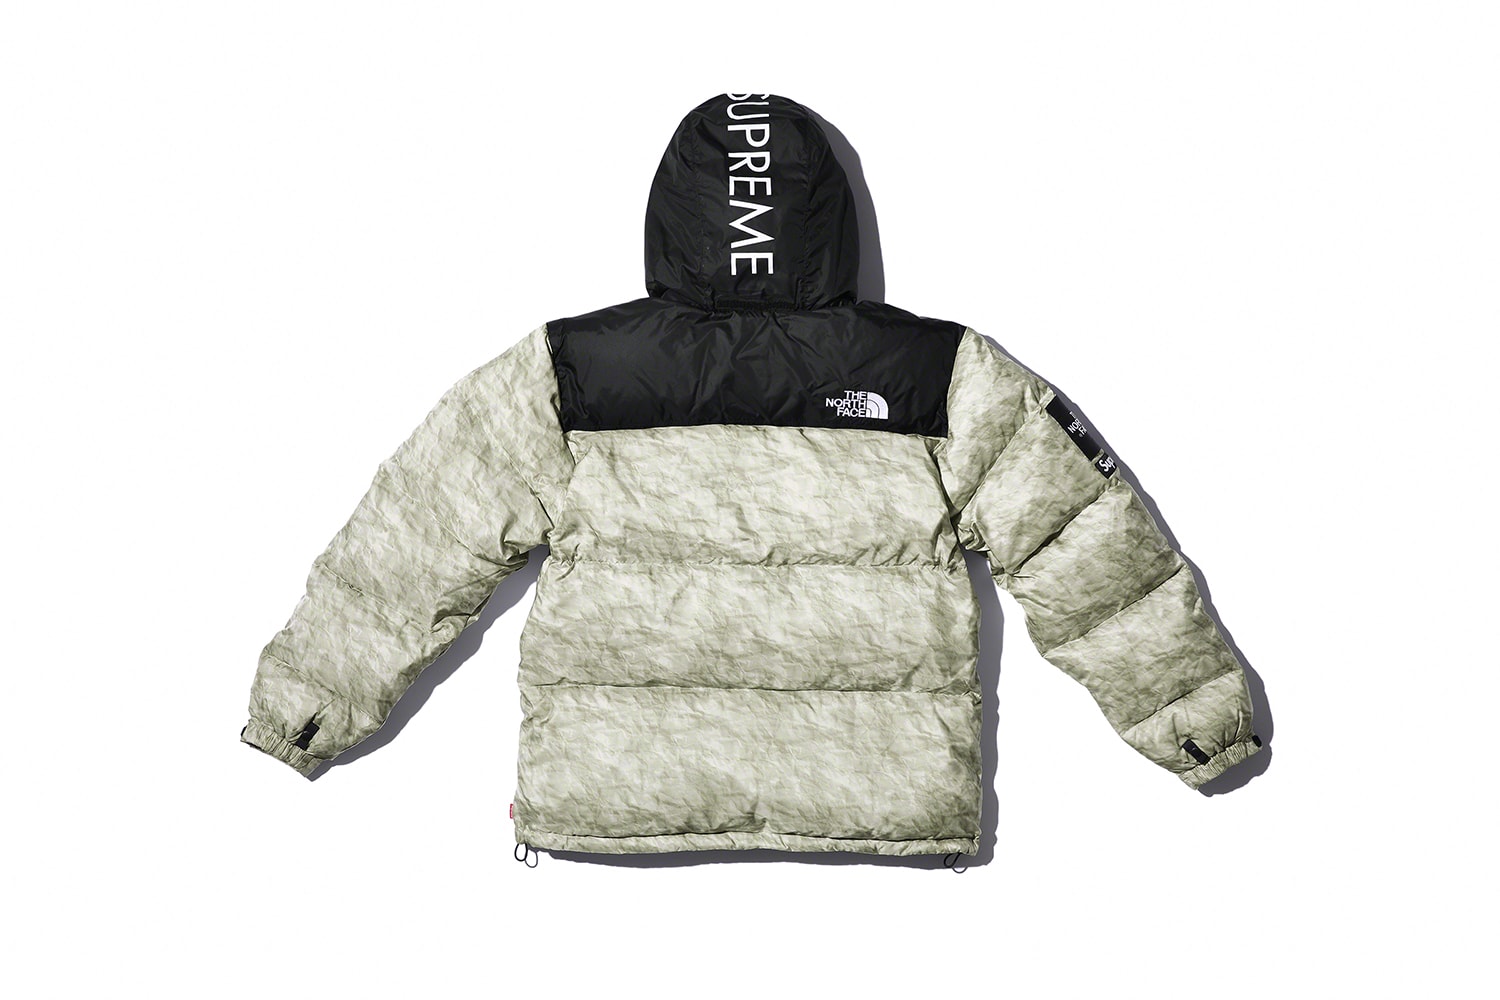 Best Style Releases: Supreme x The North Face, Off-White x Post